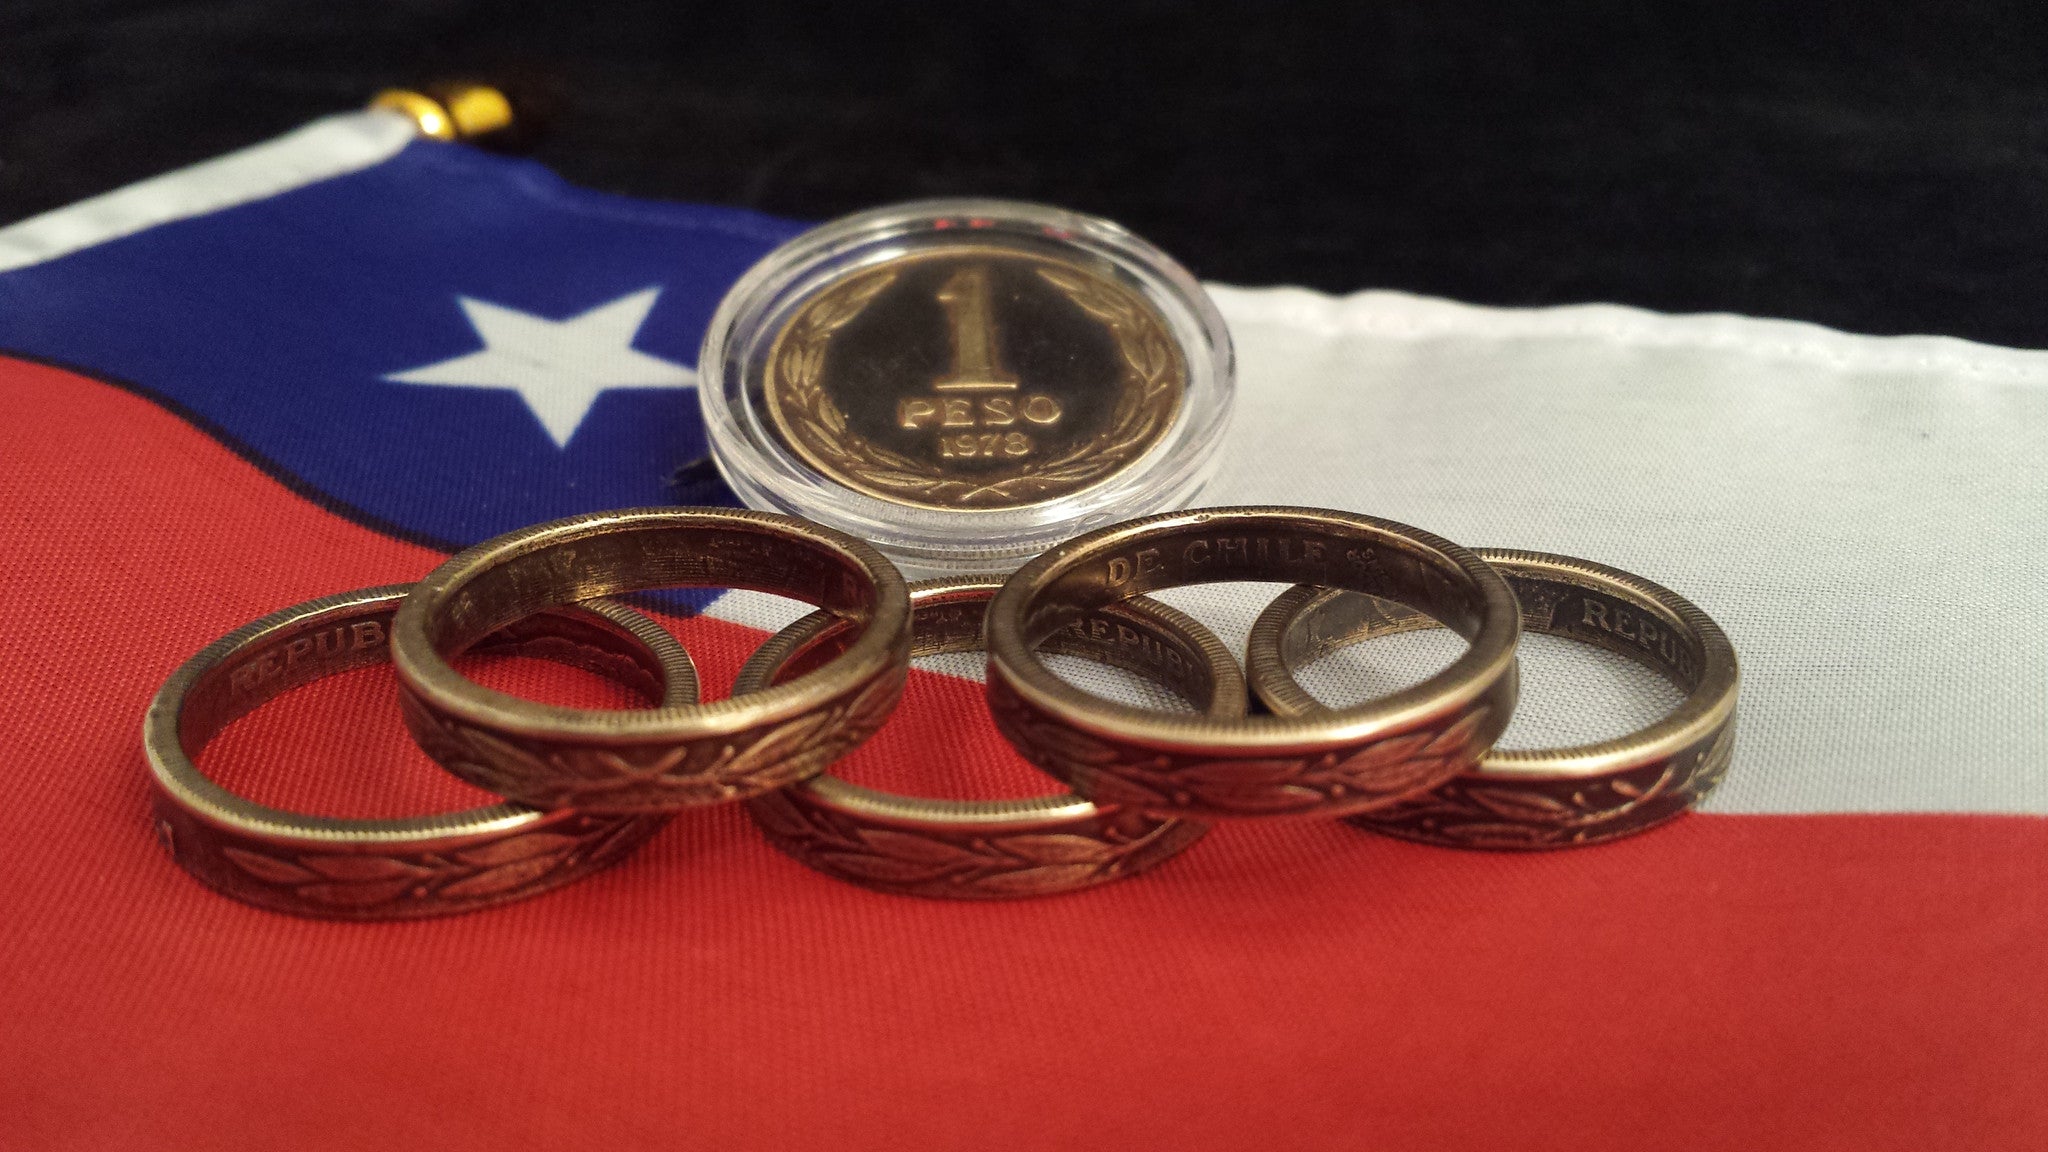 Chile 1 Peso Bronze Coin Rings